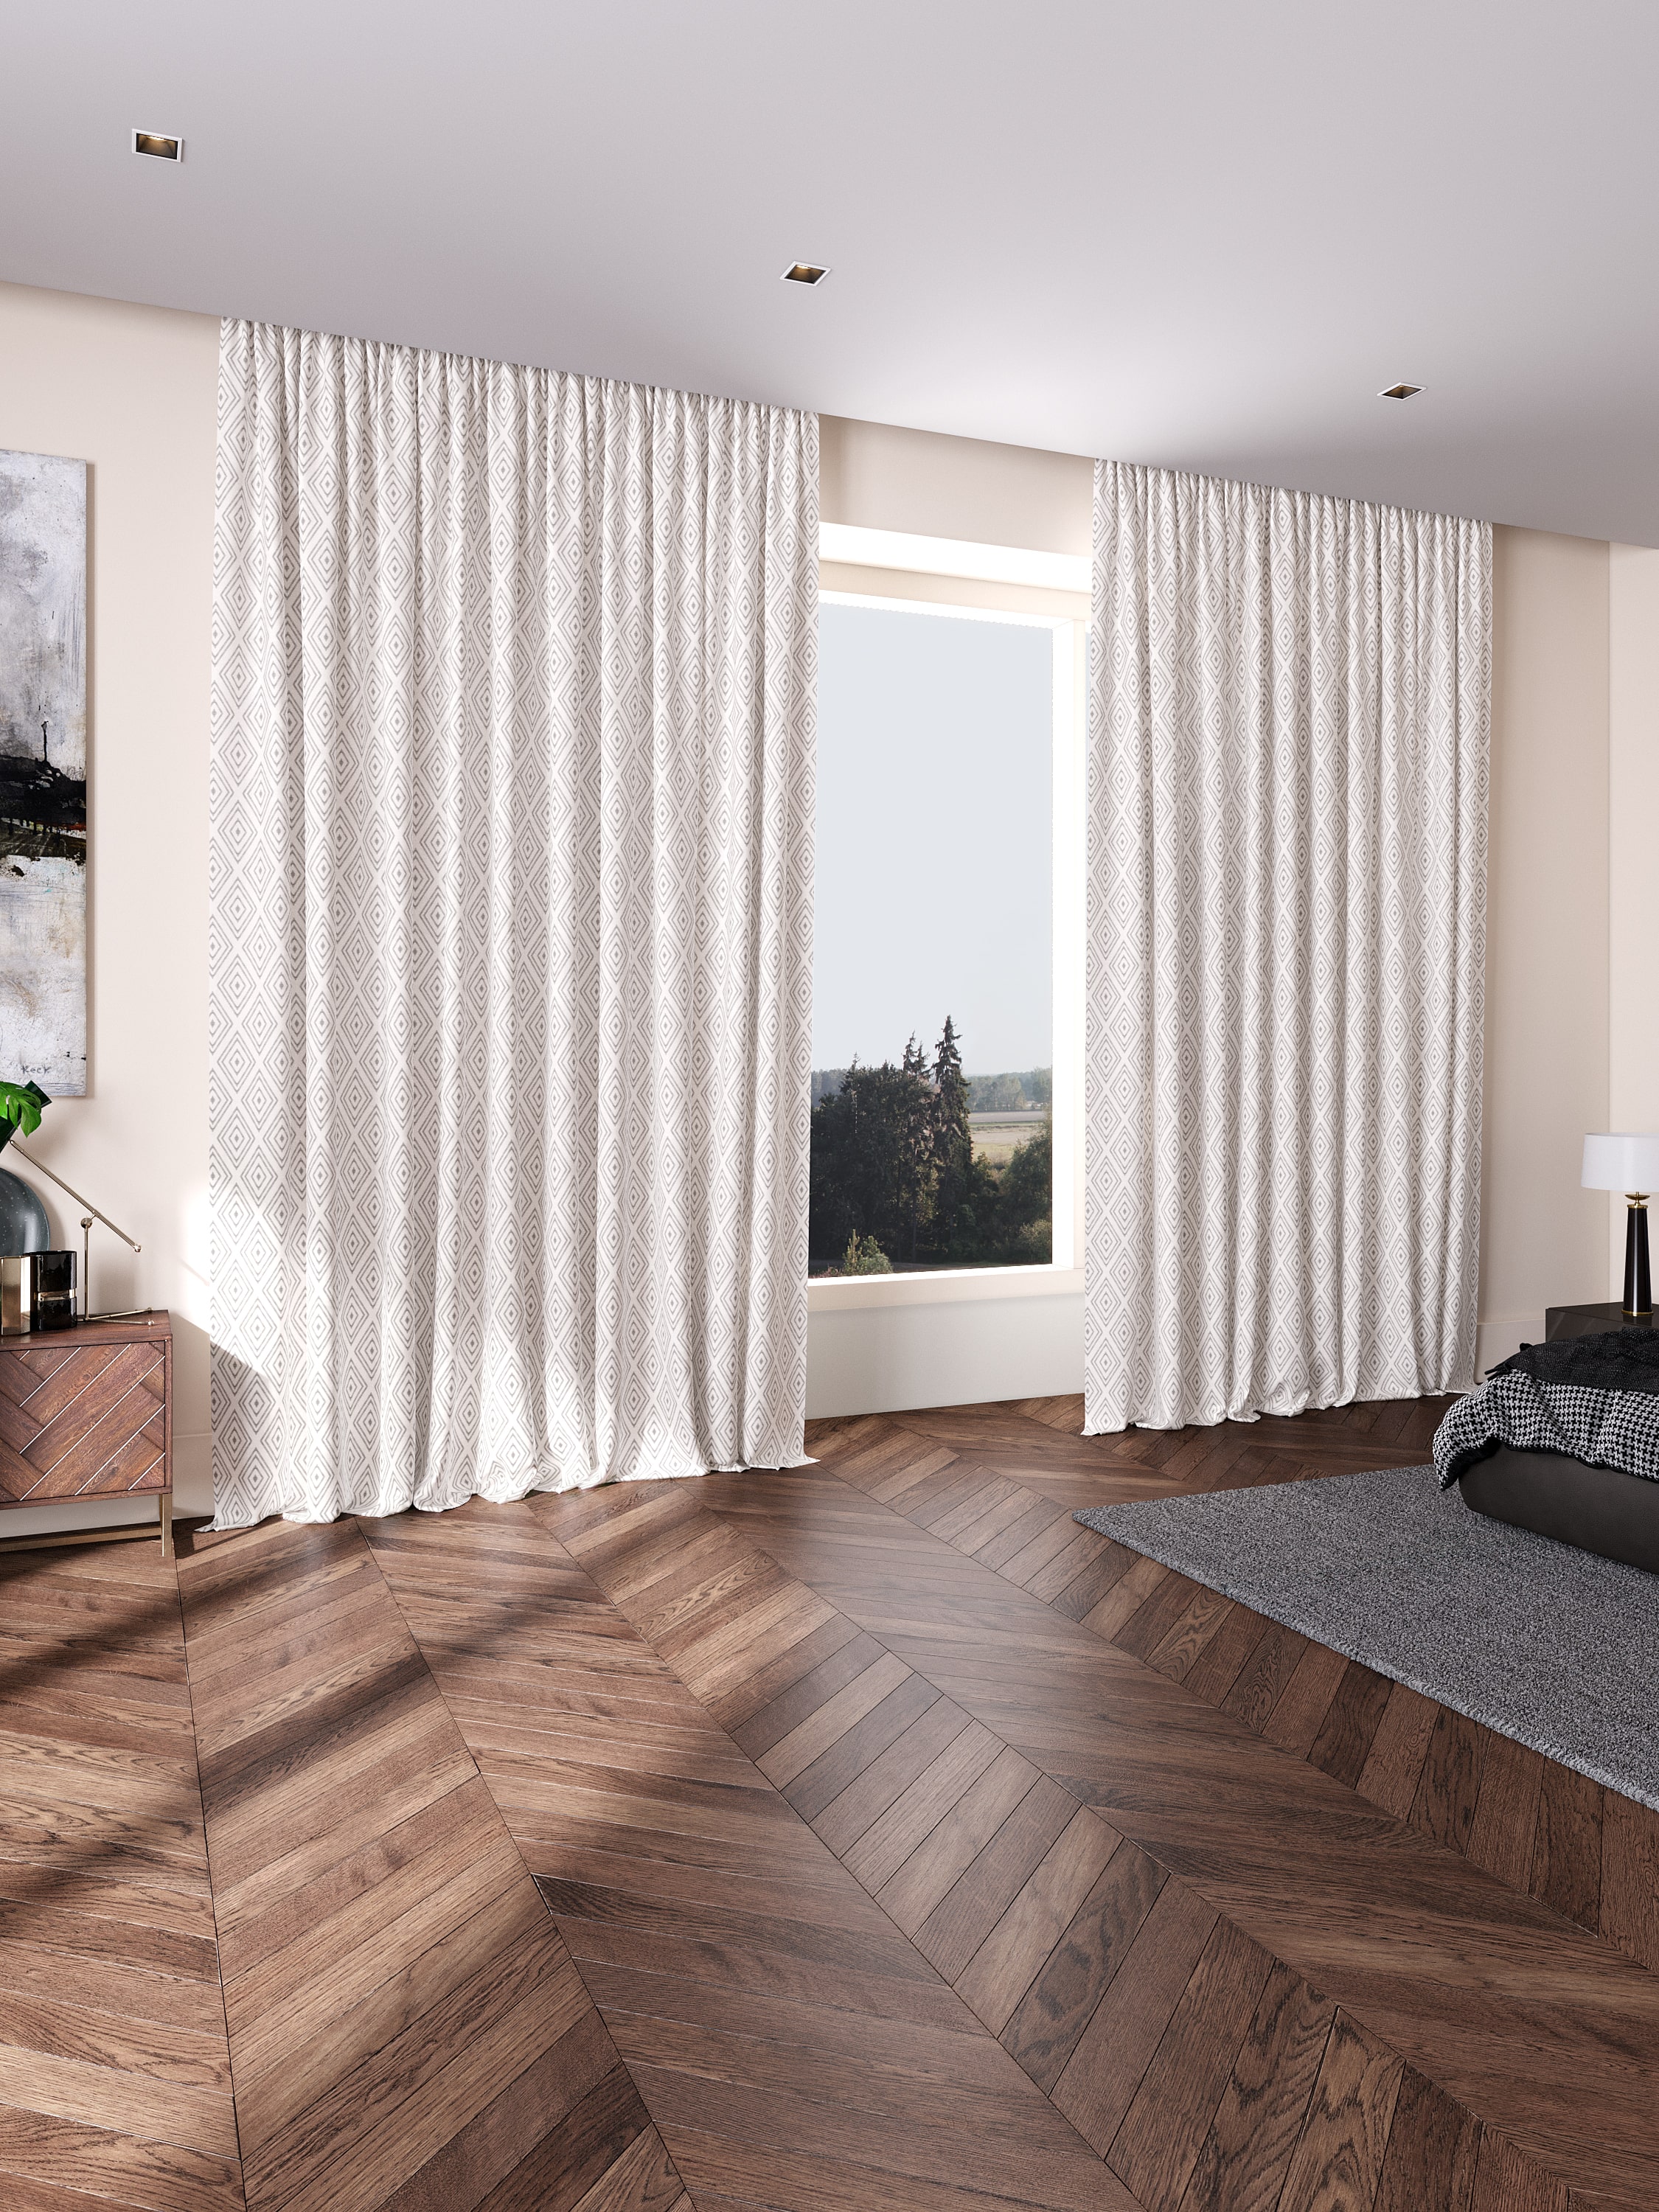 Ripple-Style Solid Curtains for the Living Room.